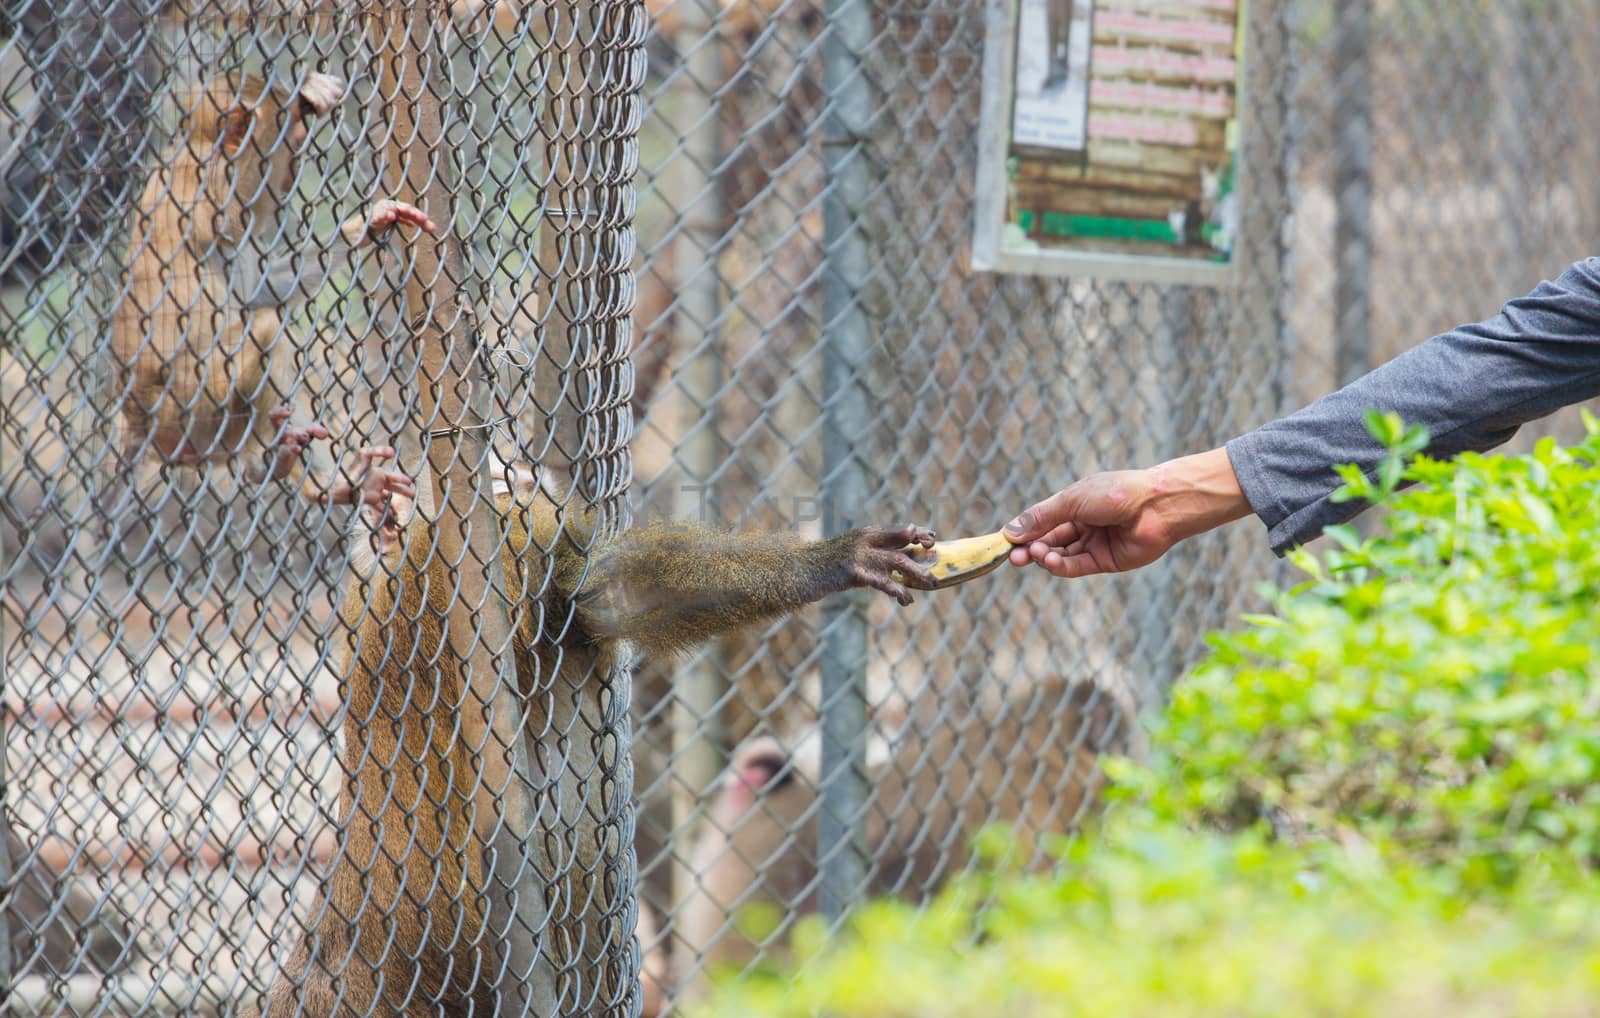 man giving banana to monkey in its cage in Thai zoo